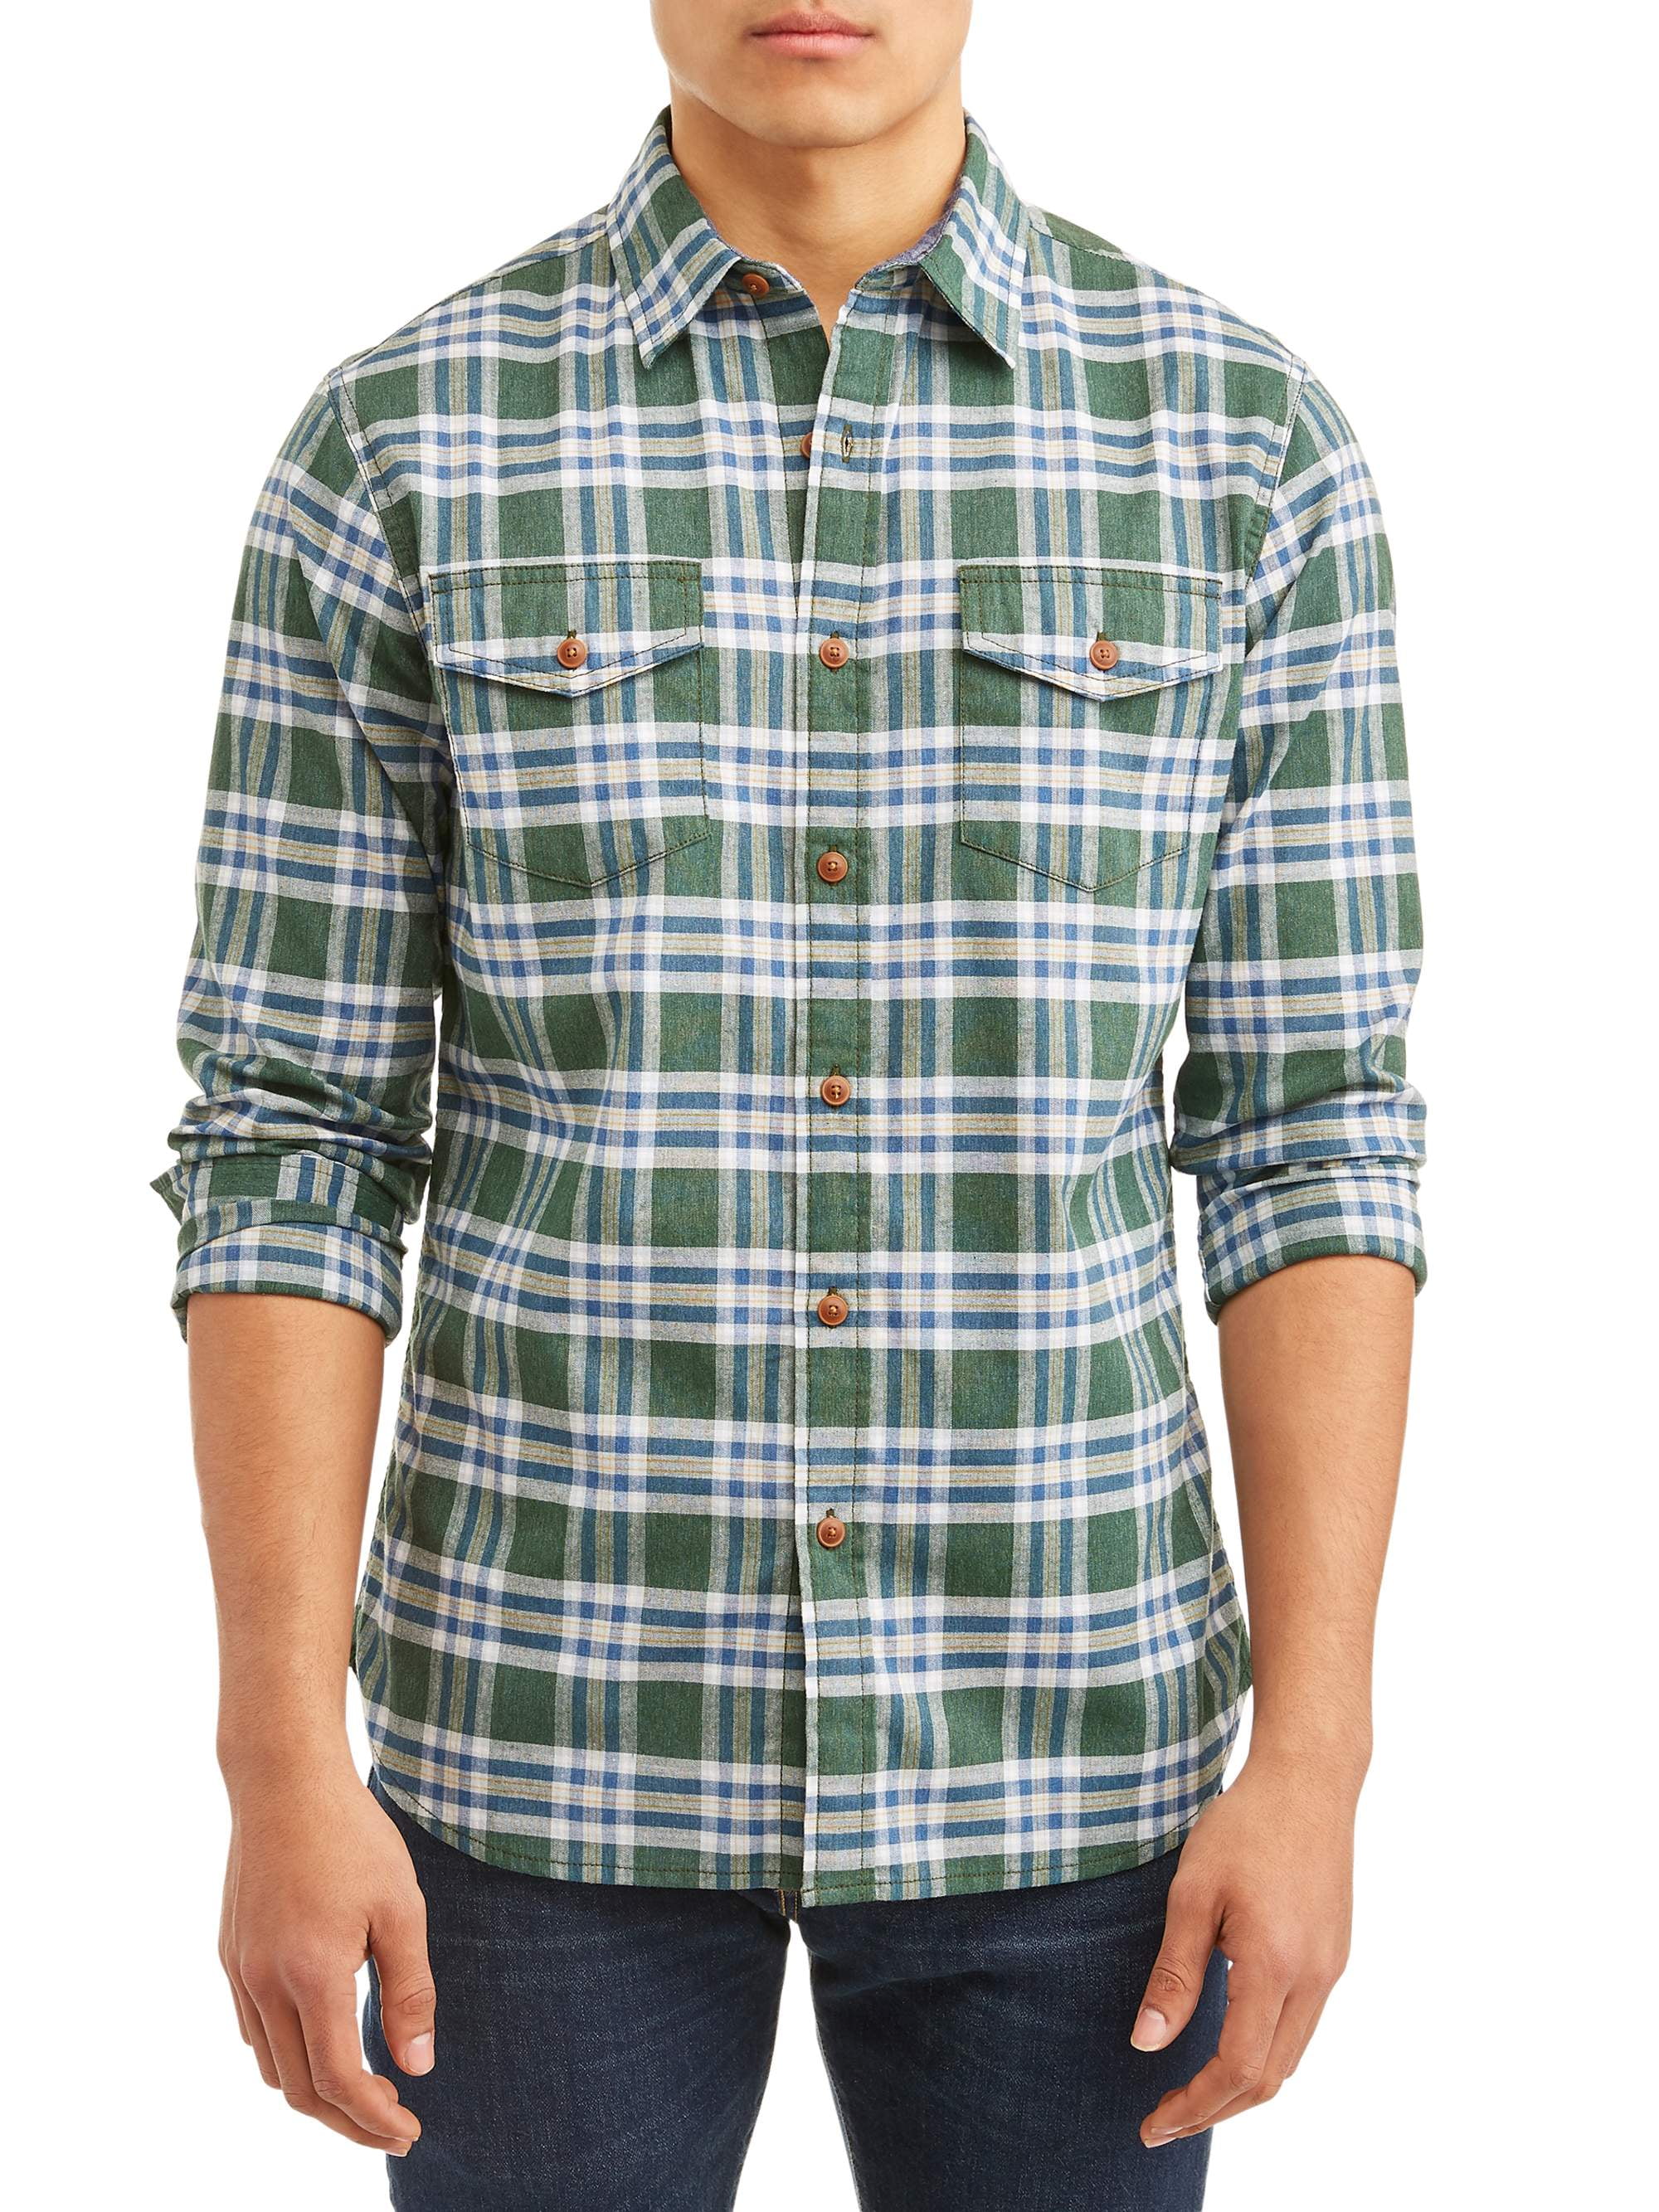 Lee Men's Long Sleeve Plaid Poplin Woven, Available up to size 2XL ...